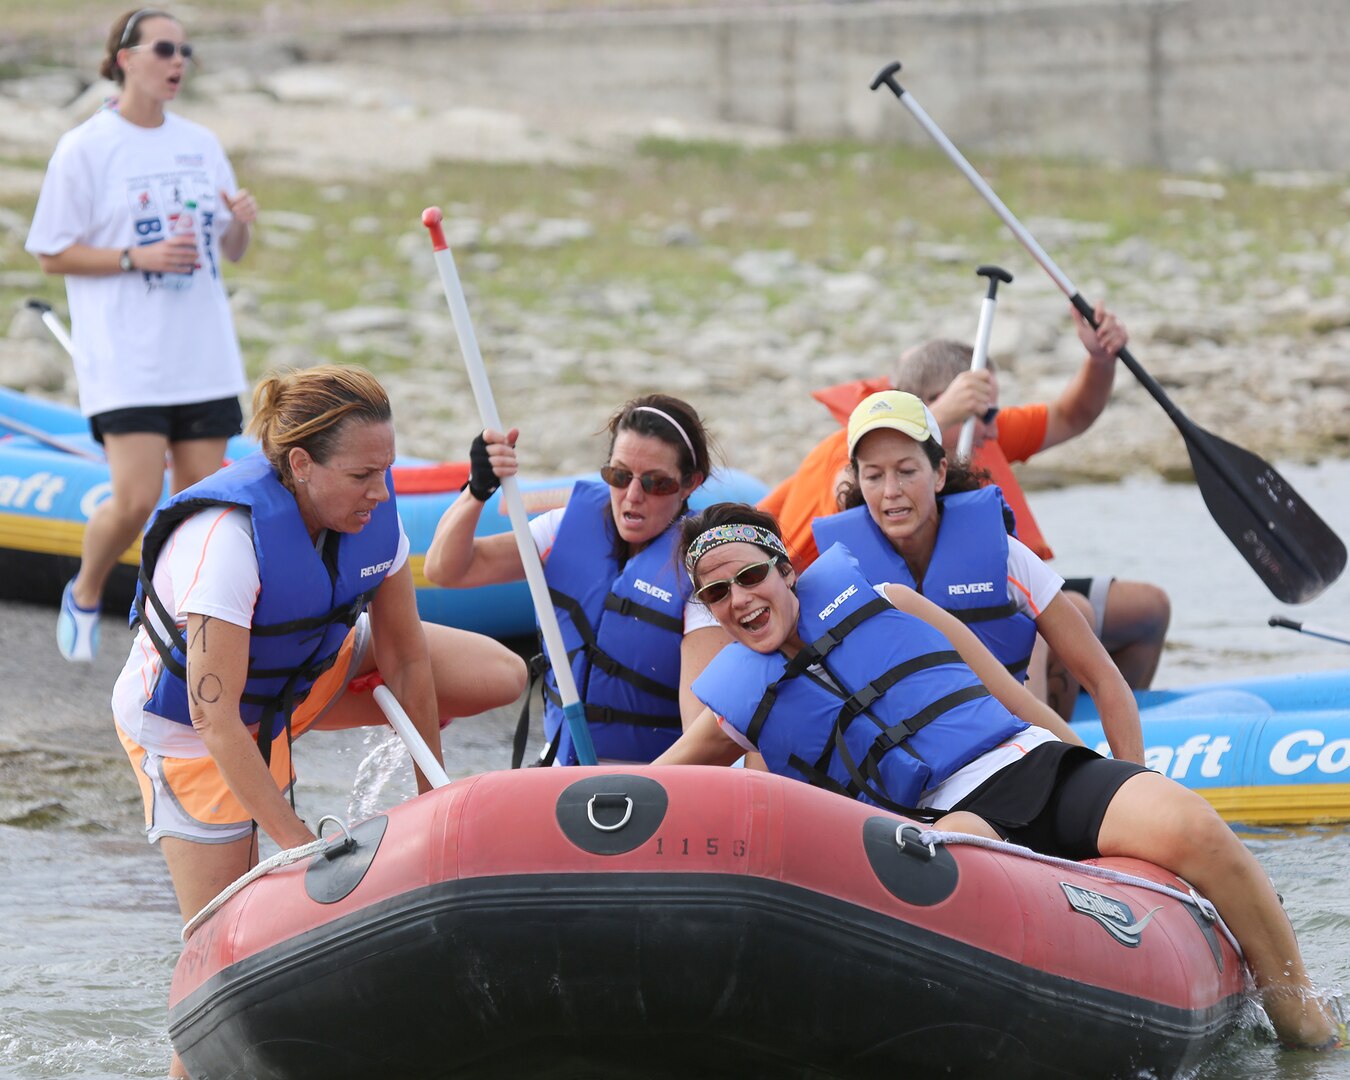 (From left to right)  Chrissy Jenkins, team captain, Rebecca Sinopoli, Danette Blair and Roberta Morrissey of the X-tremely Sweaty Housewives team board a raft for the 2-mile rafting portion of the Rambler 120 triathlon event held at Joint Base San Antonio Recreation Park, Canyon Lake, Texas, Oct. 20.  The team captured the Silver – All Female Xtreme category in the competition with a time of 2:57:40 (U.S. Air Force photo by Dan J. Solis)

